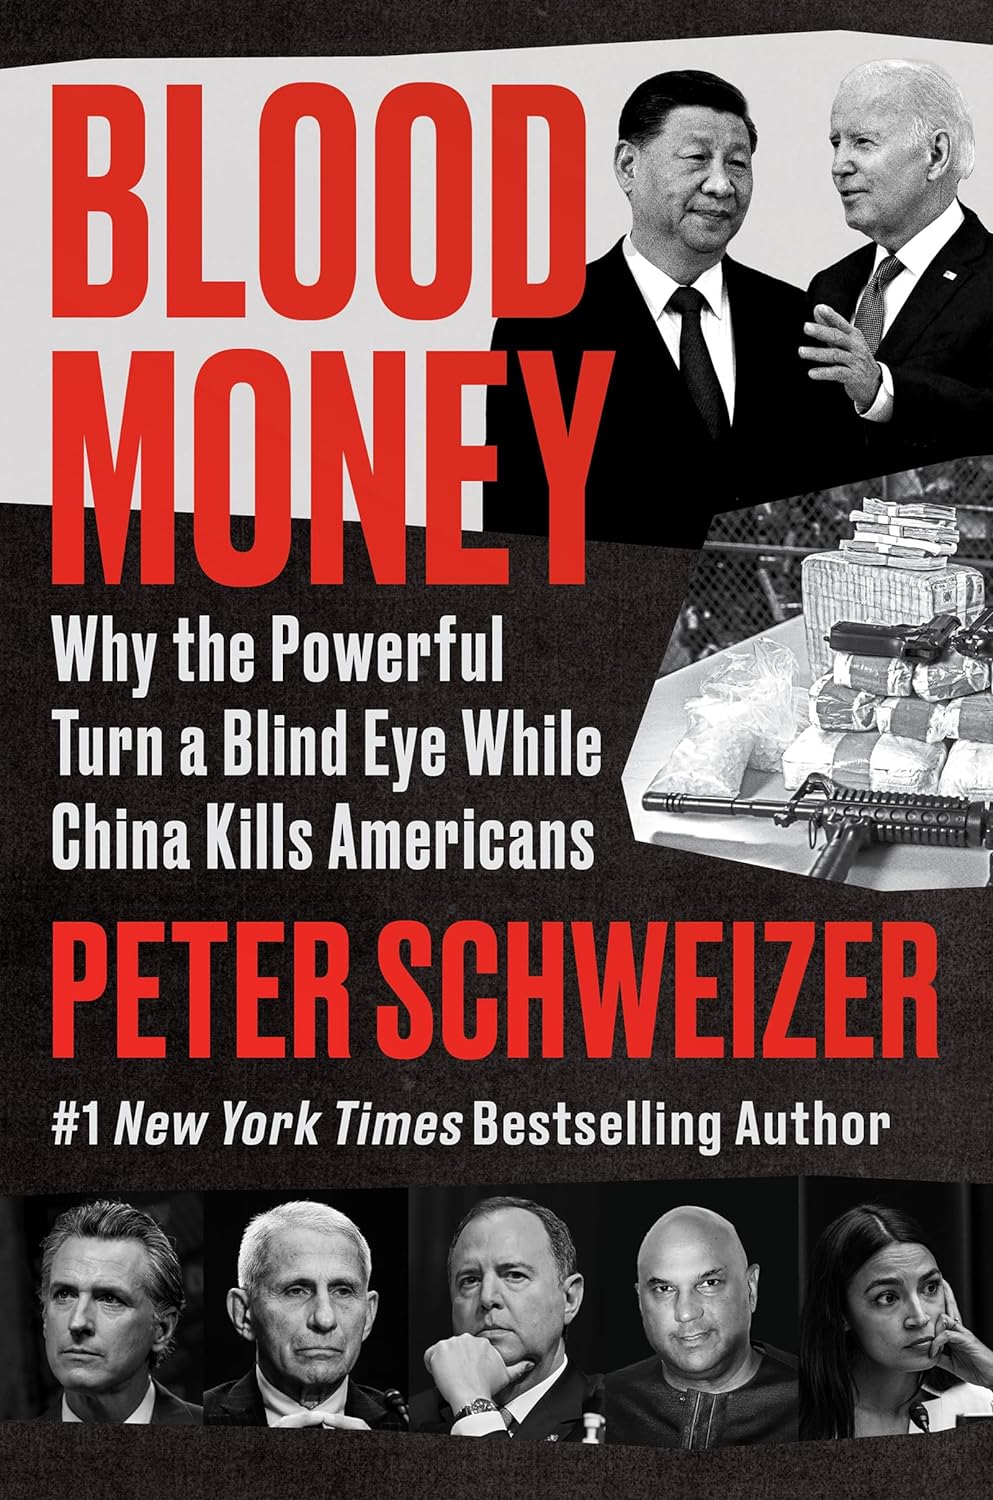 Blood Money: Why the Powerful Turn a Blind Eye While China Kills Americans" emerges as a compelling narrative that delves deep into the intricate web of economic and political relations between China and the United States